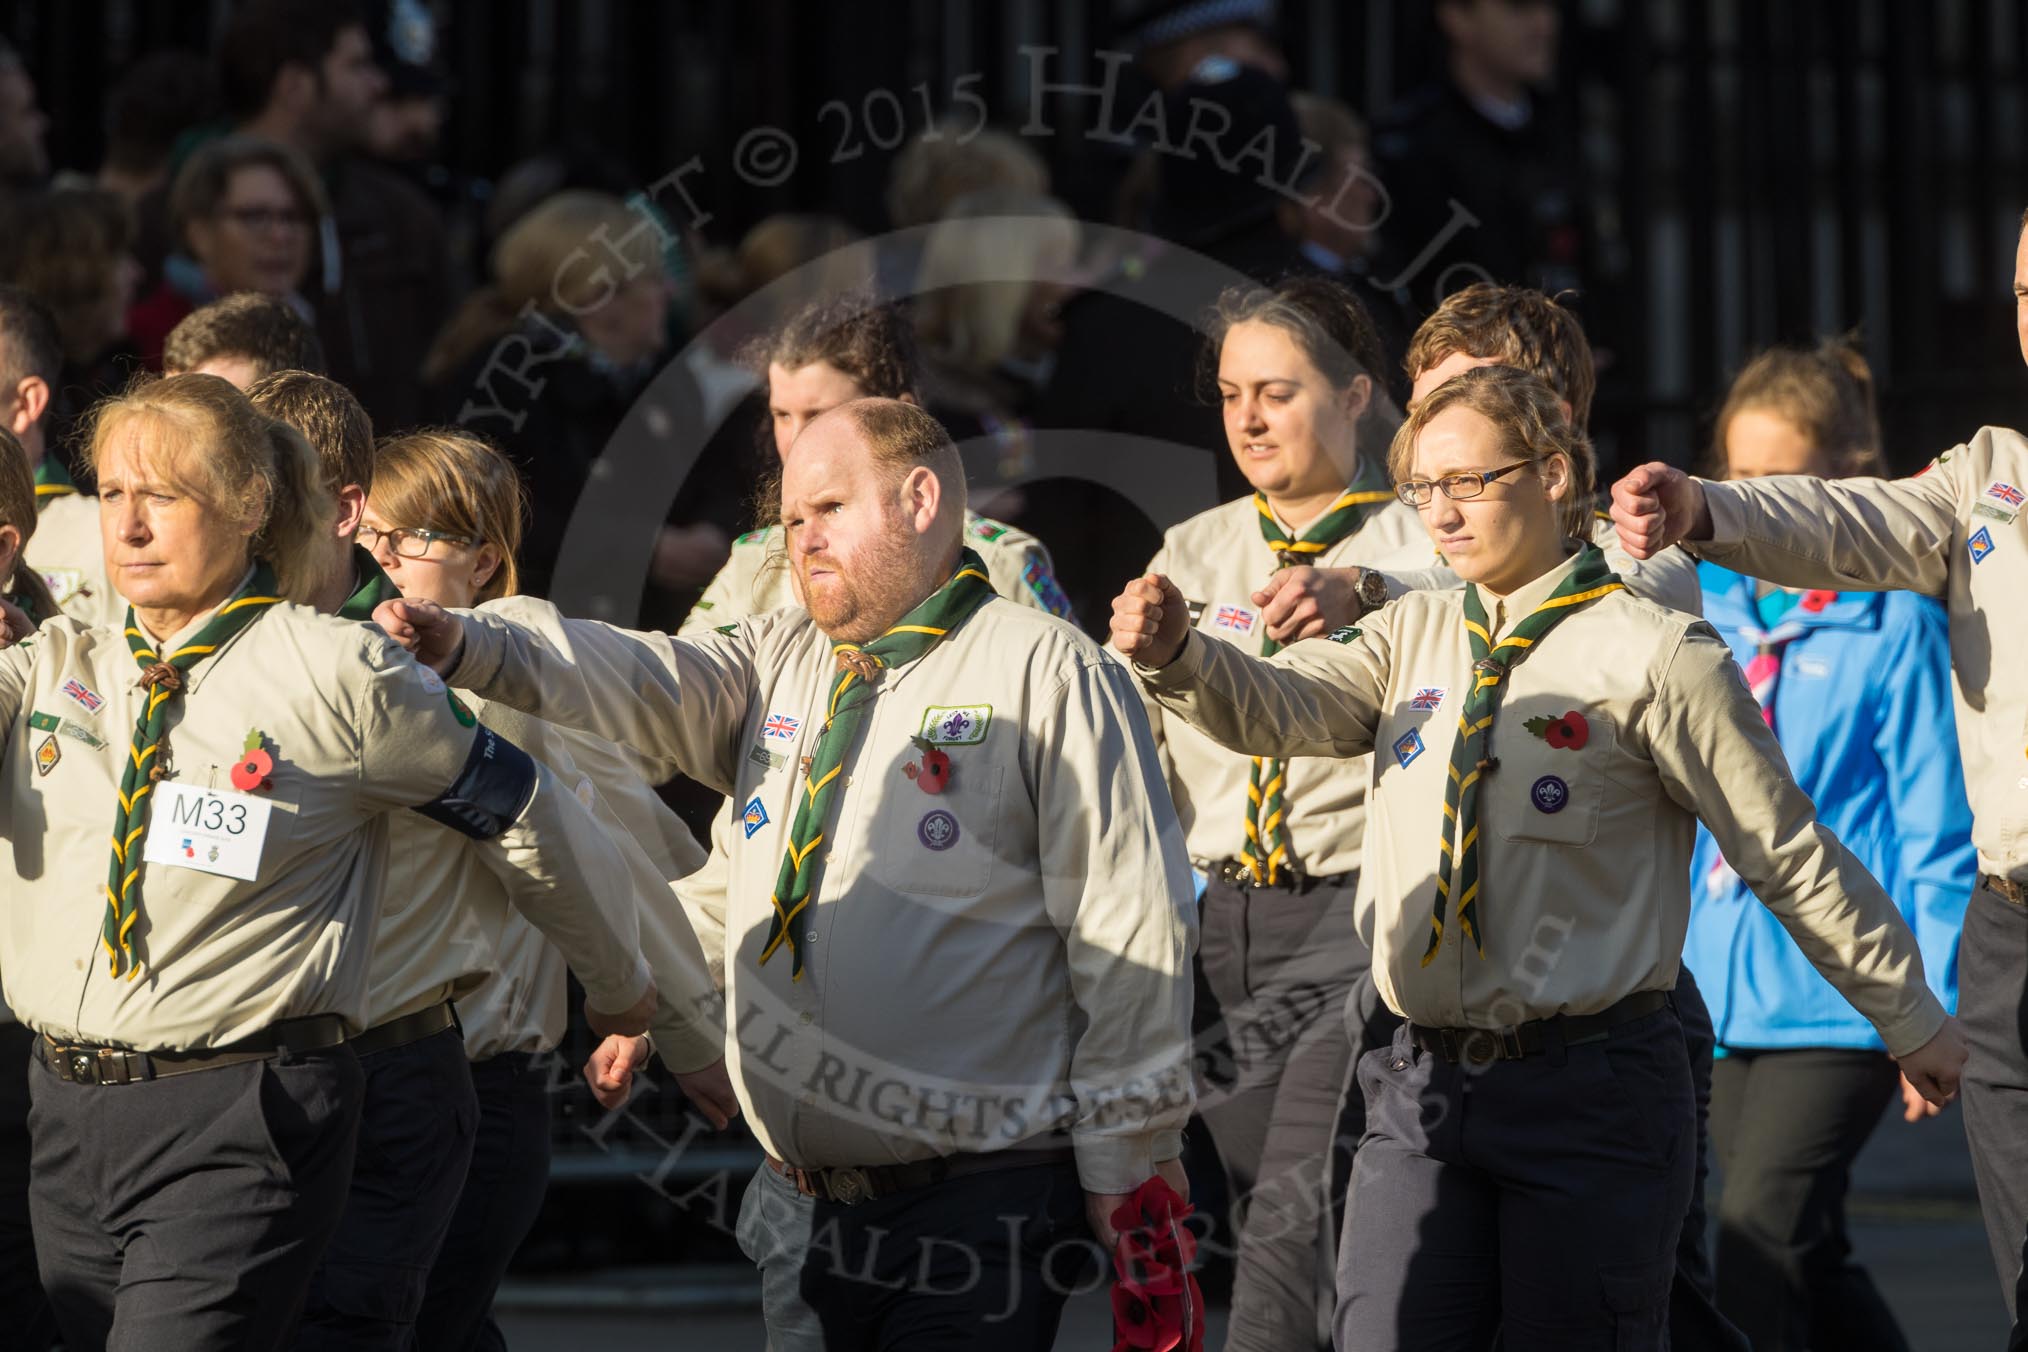 March Past, Remembrance Sunday at the Cenotaph 2016: M33 Scout Association.
Cenotaph, Whitehall, London SW1,
London,
Greater London,
United Kingdom,
on 13 November 2016 at 13:18, image #2848